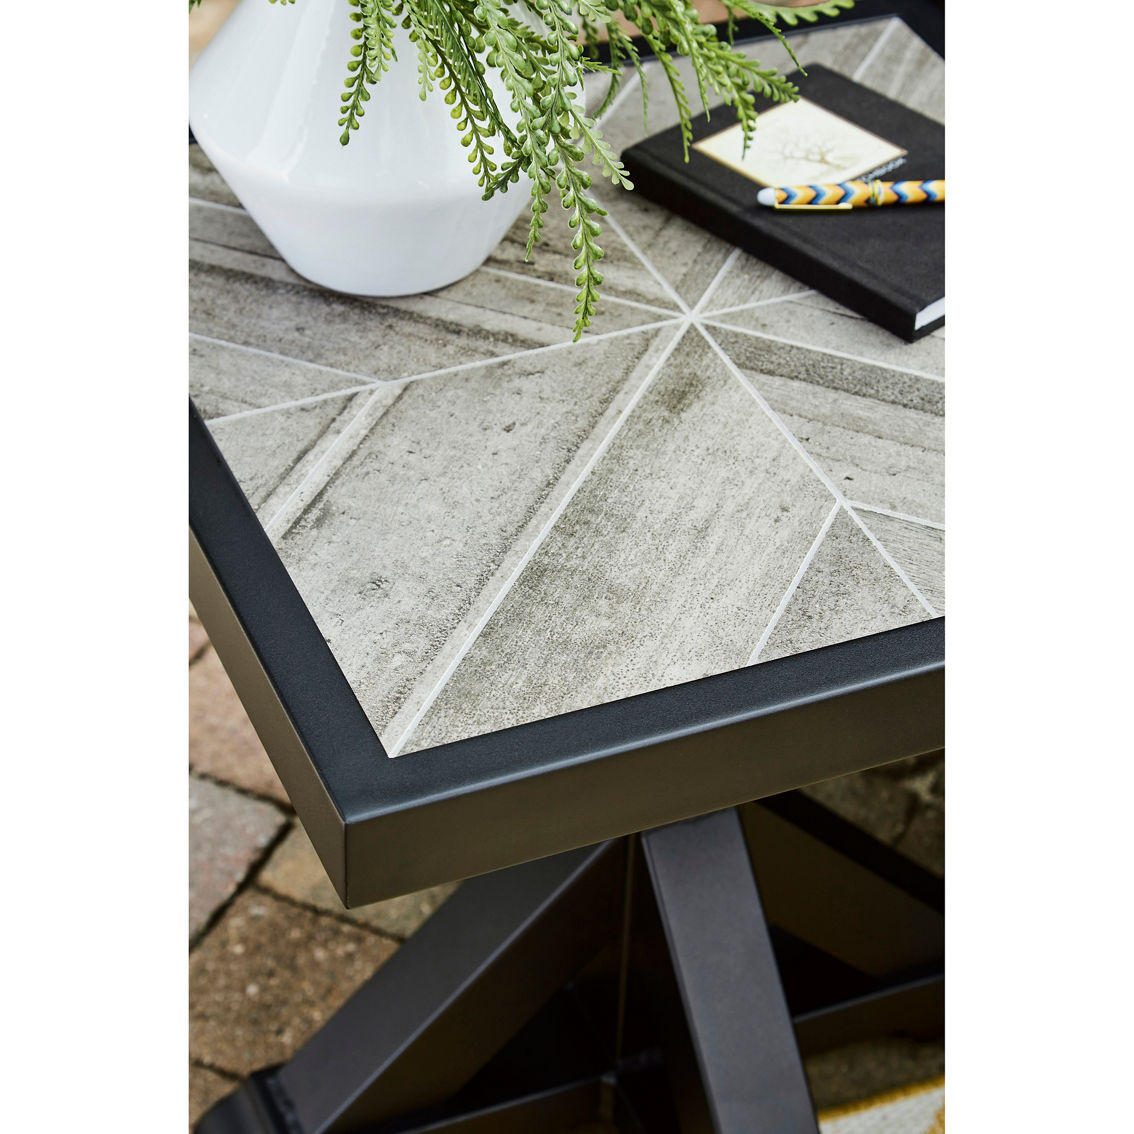 Signature Design by Ashley Beachcroft 5 pc. Outdoor Set including Firepit Table - Image 7 of 7